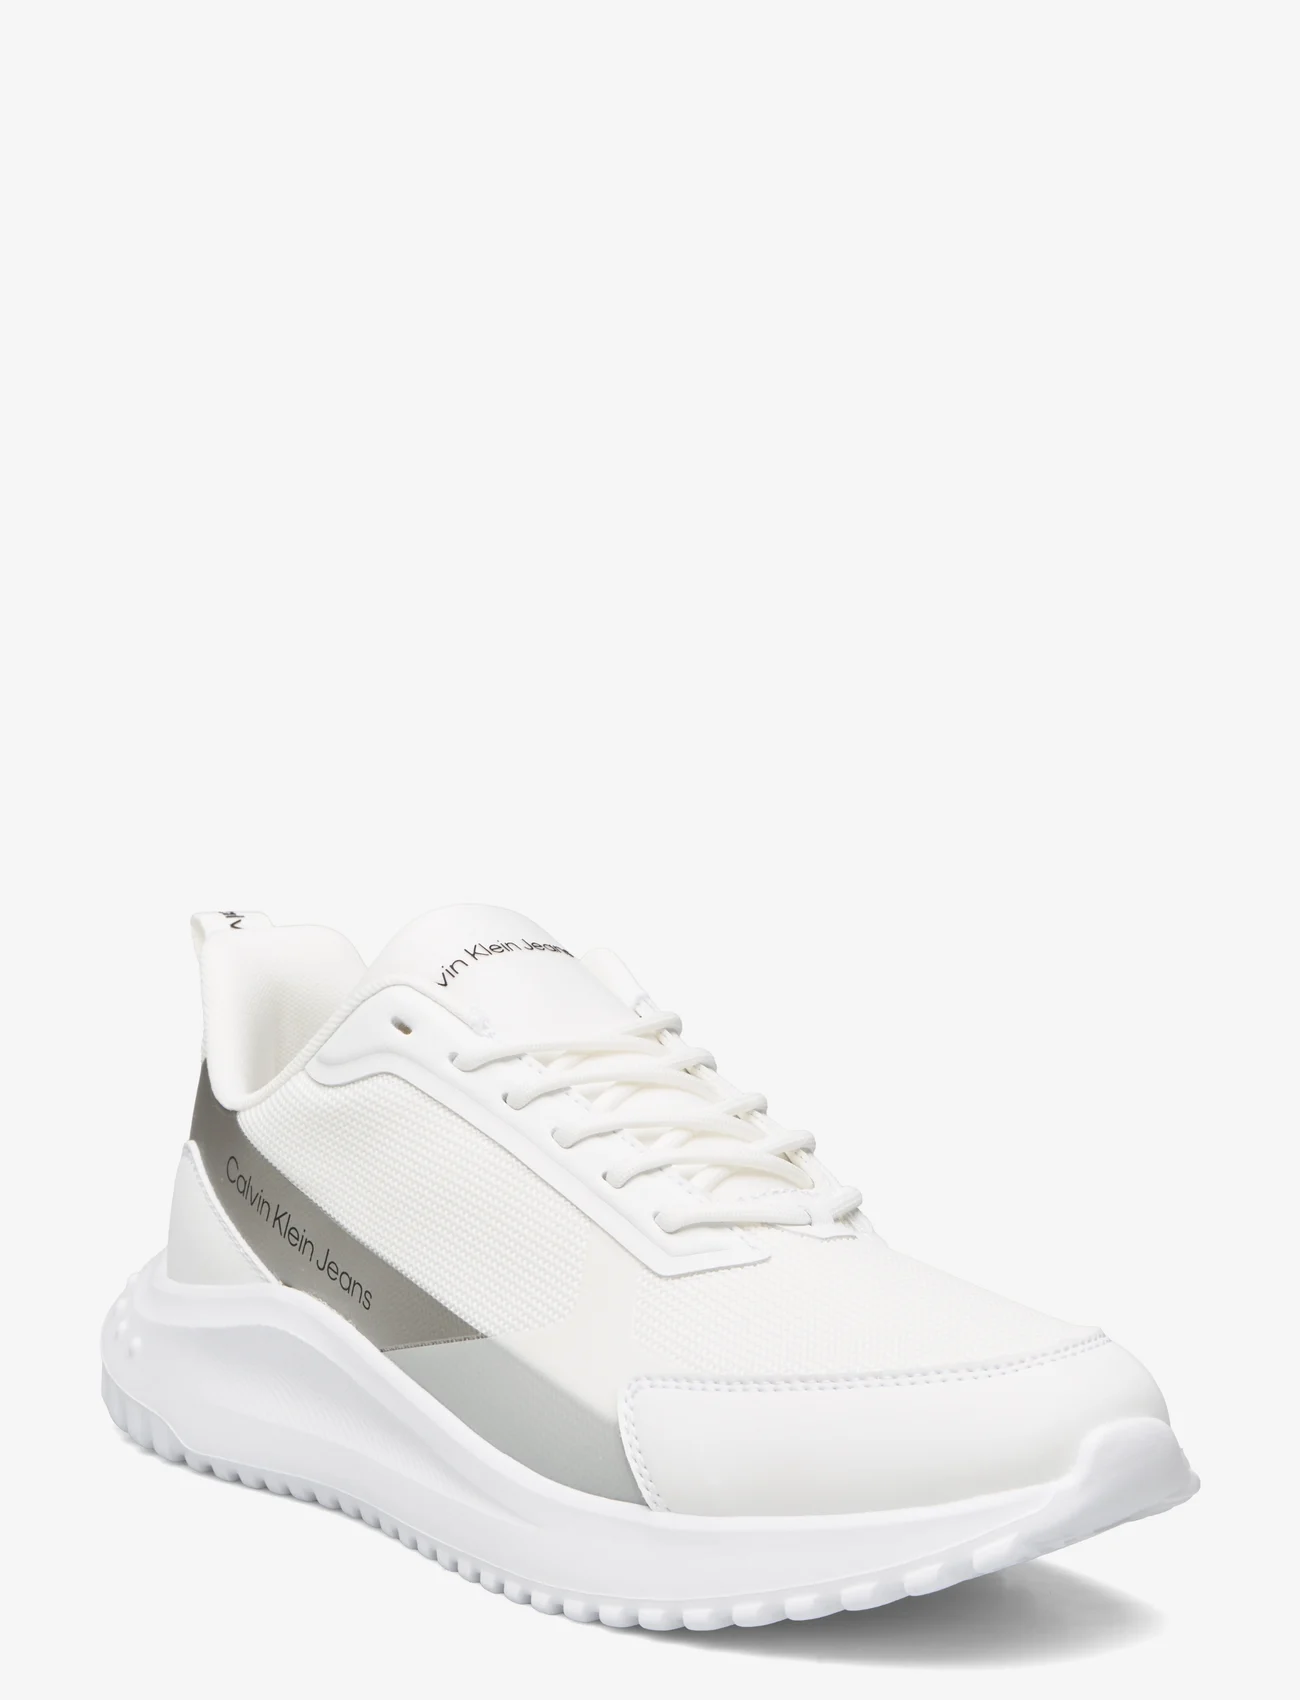 Calvin Klein - EVA RUNNER LOWLACEUP MIX IN MR - lave sneakers - triple bright white/silver - 0